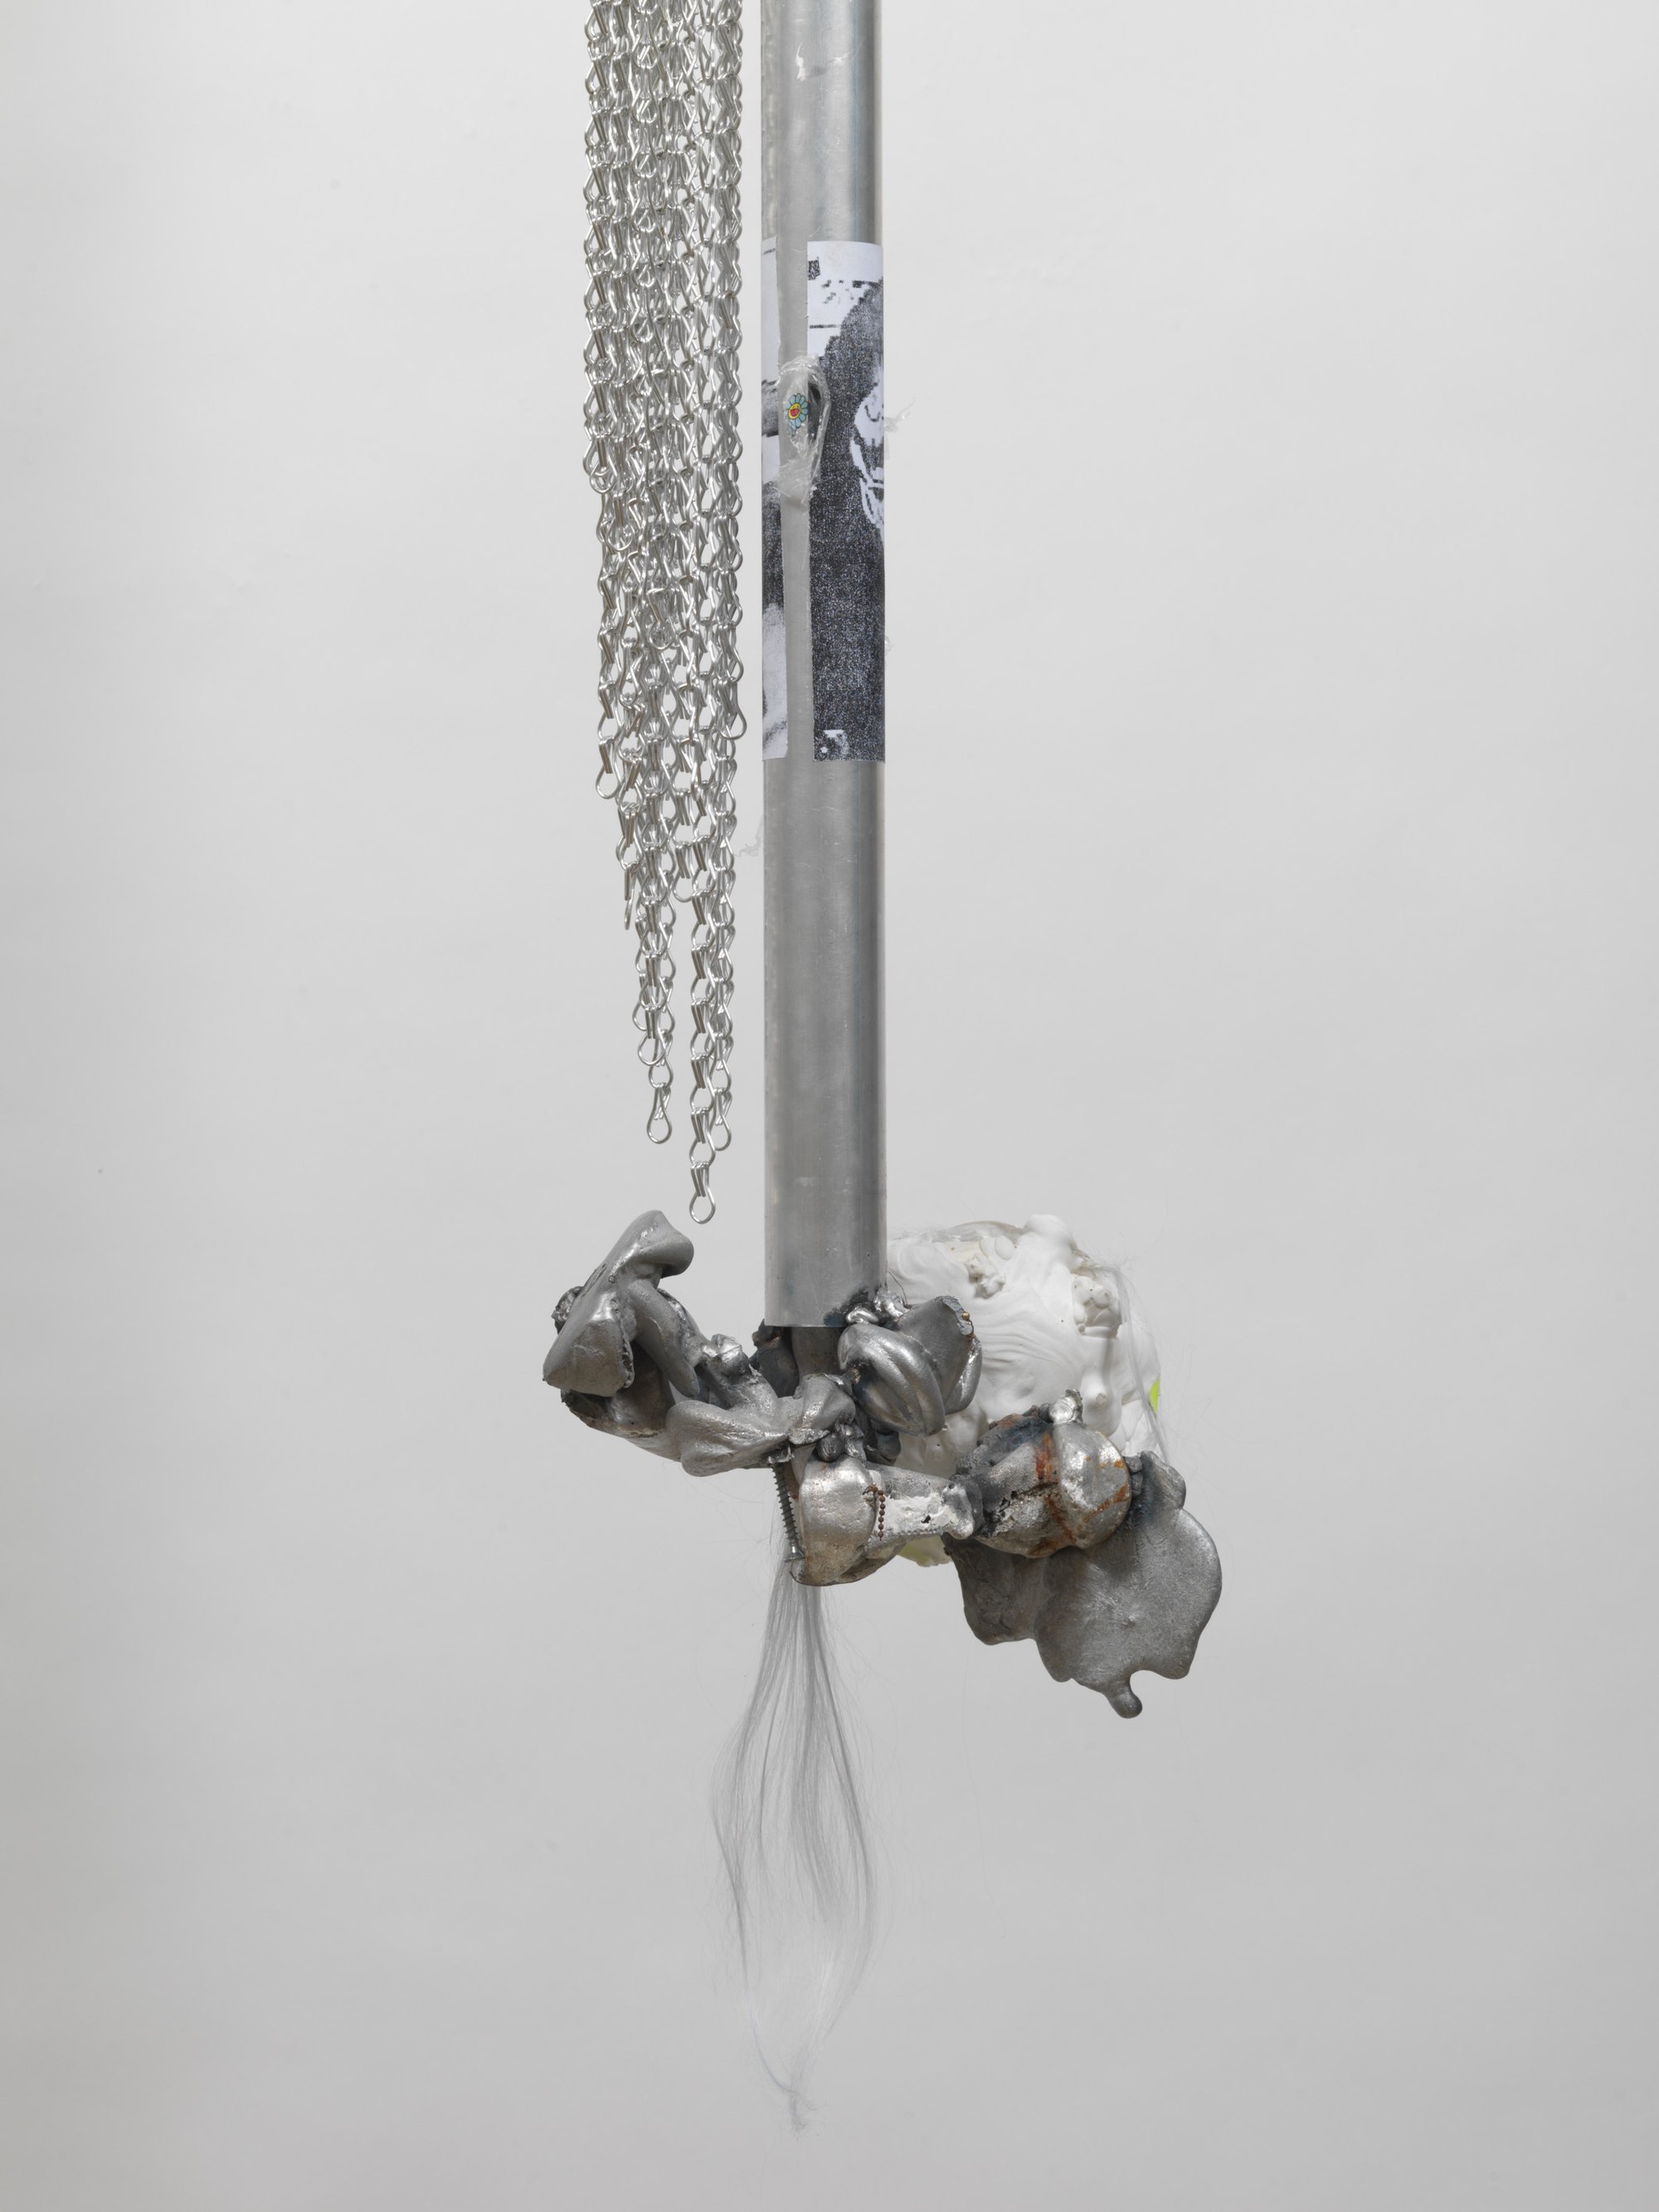 David Douard, for thee Secretion’ 3, detail, aluminum, plastic beads, plaster, paper, synthetic hair, 280 x 30 x 20 cm (110 1/4 x 11 3/4 x 7 7/8 in), 2021